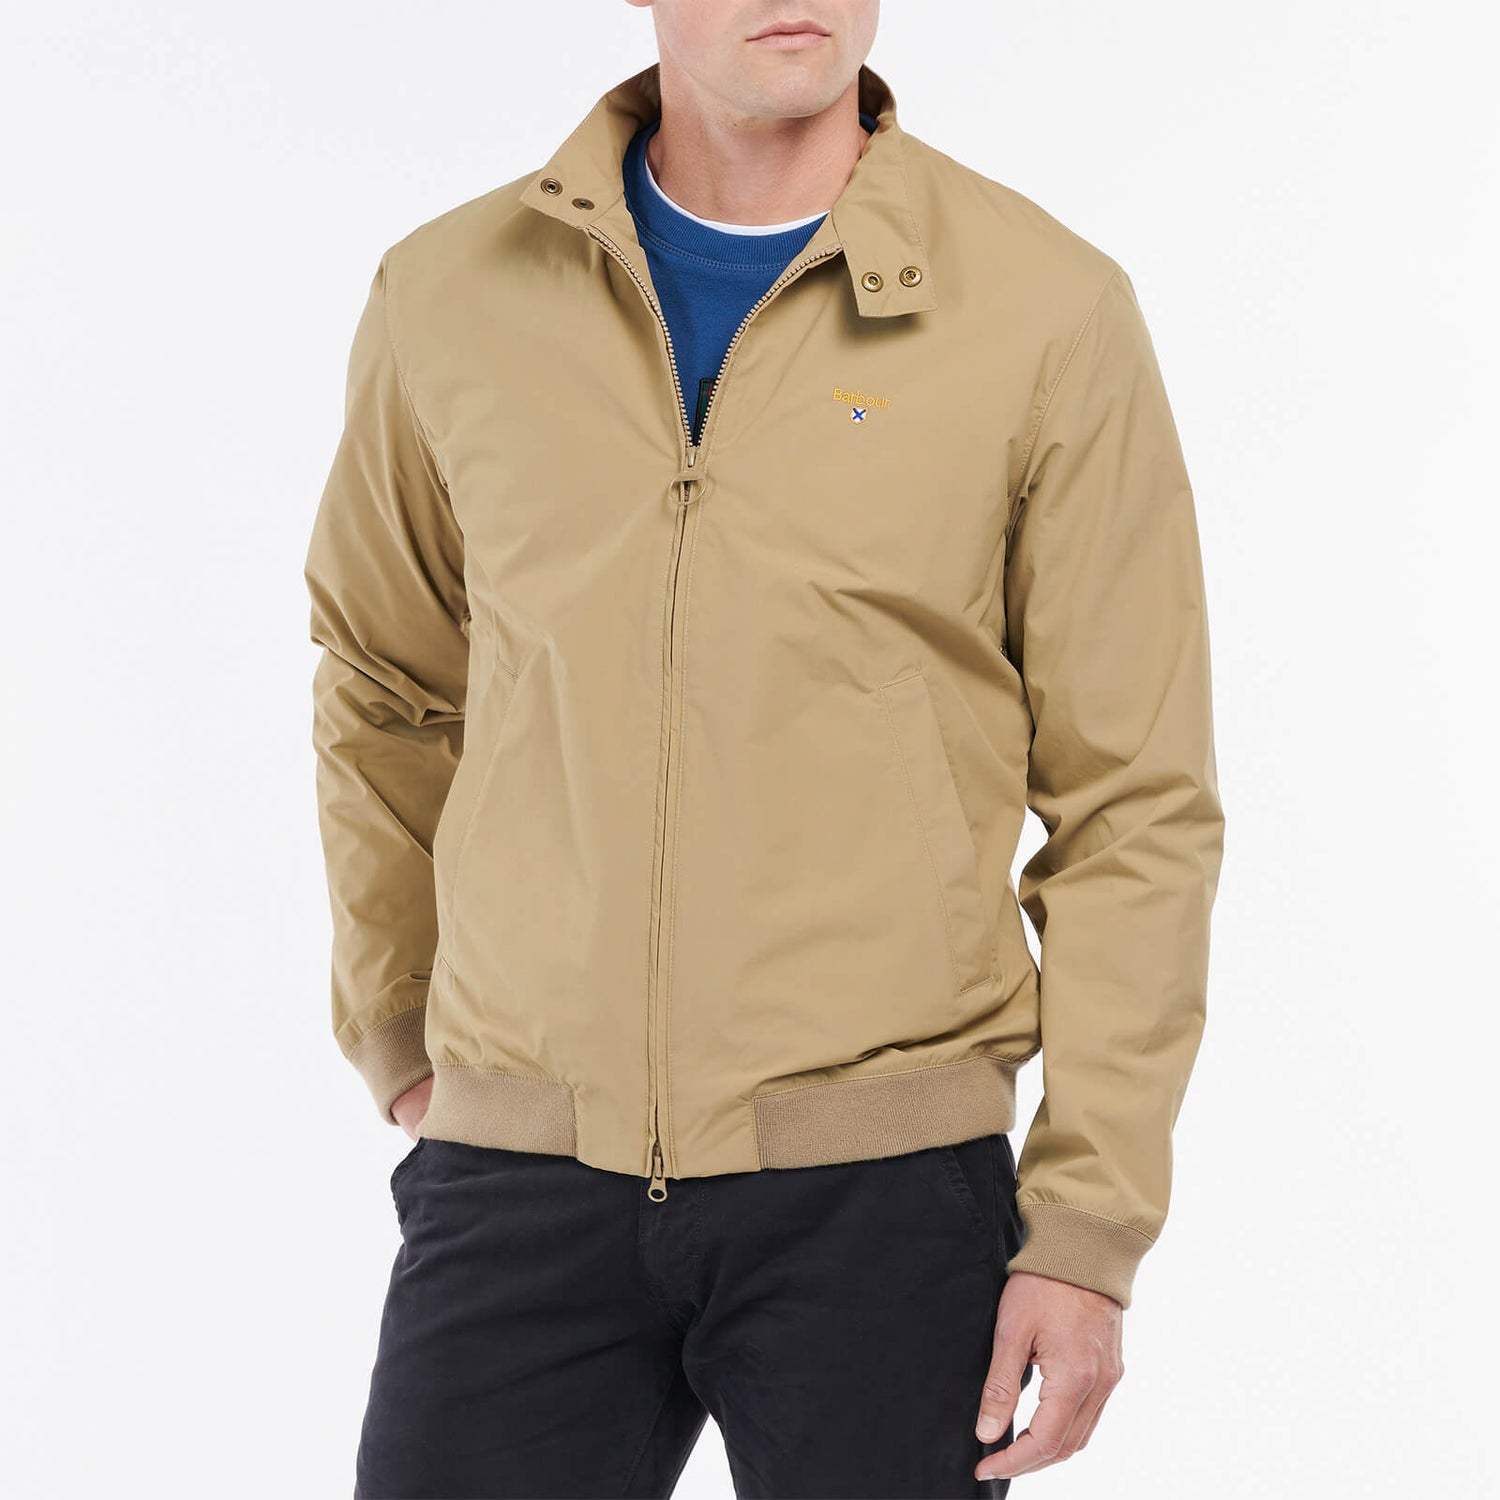 Barbour Men's Crest Royston Casual Jacket - Military Brown/Ivy - S